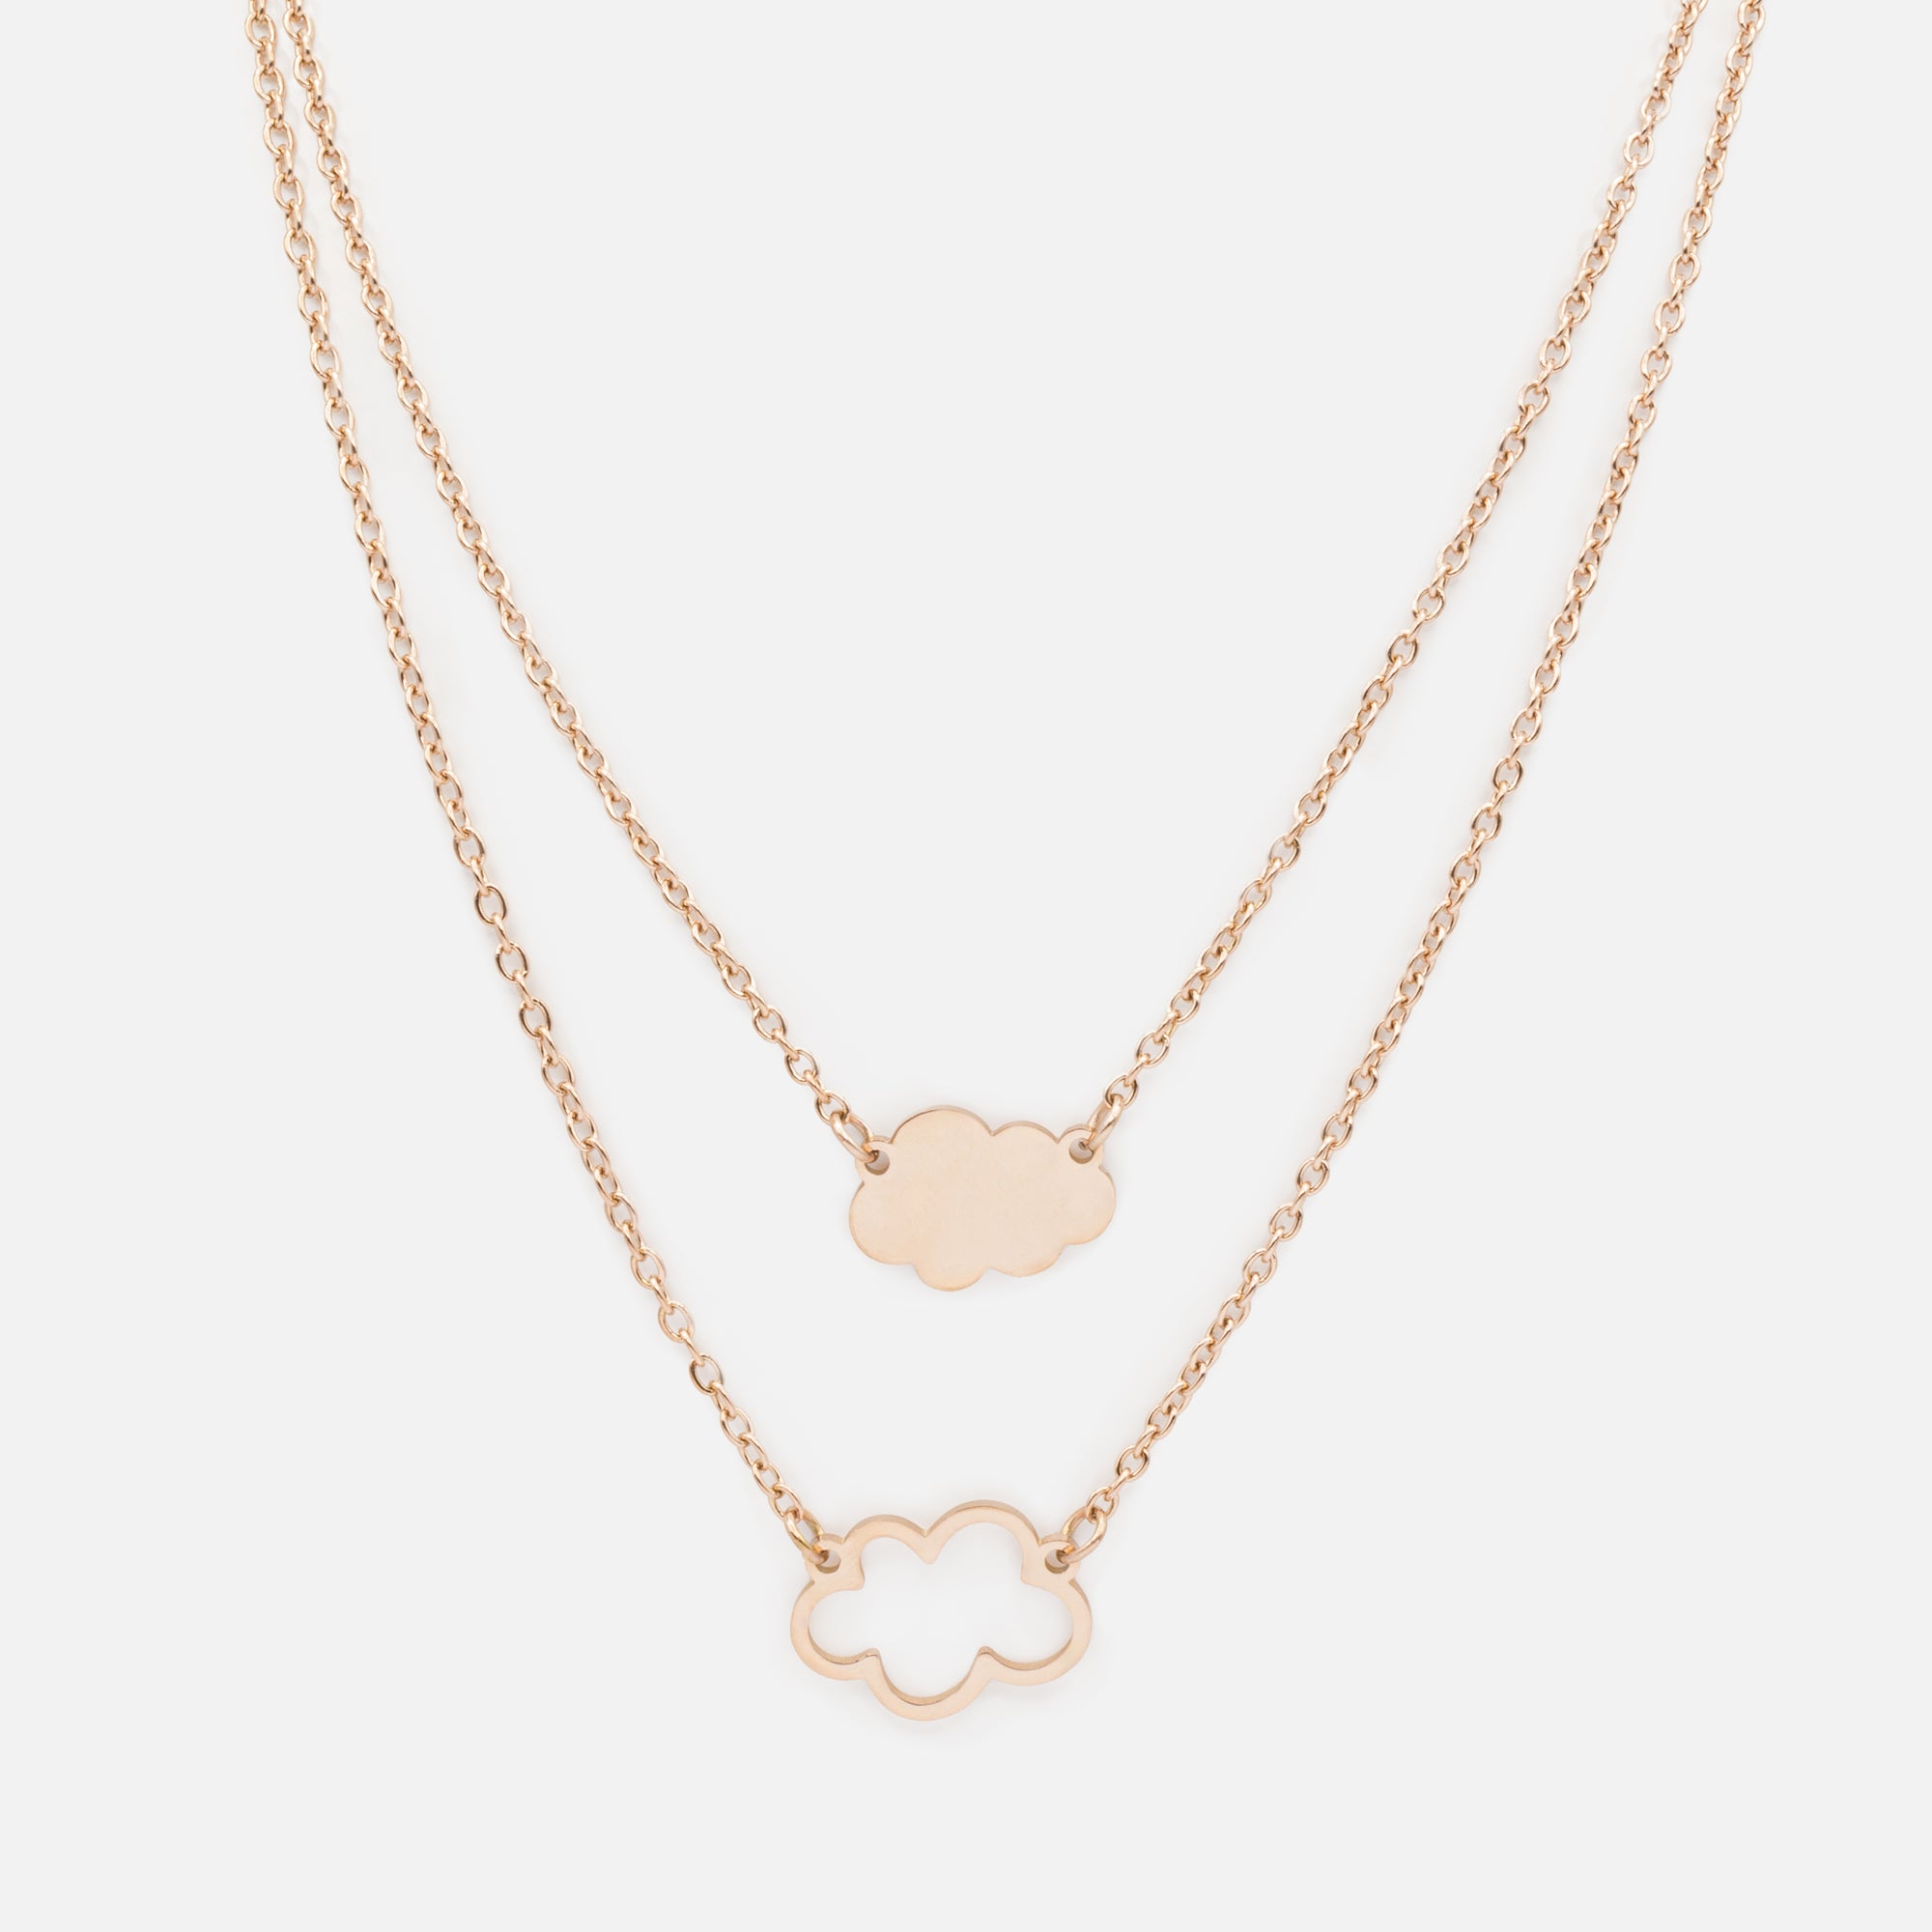 Set of two rose gold Mini & Me cloud necklaces in stainless steel